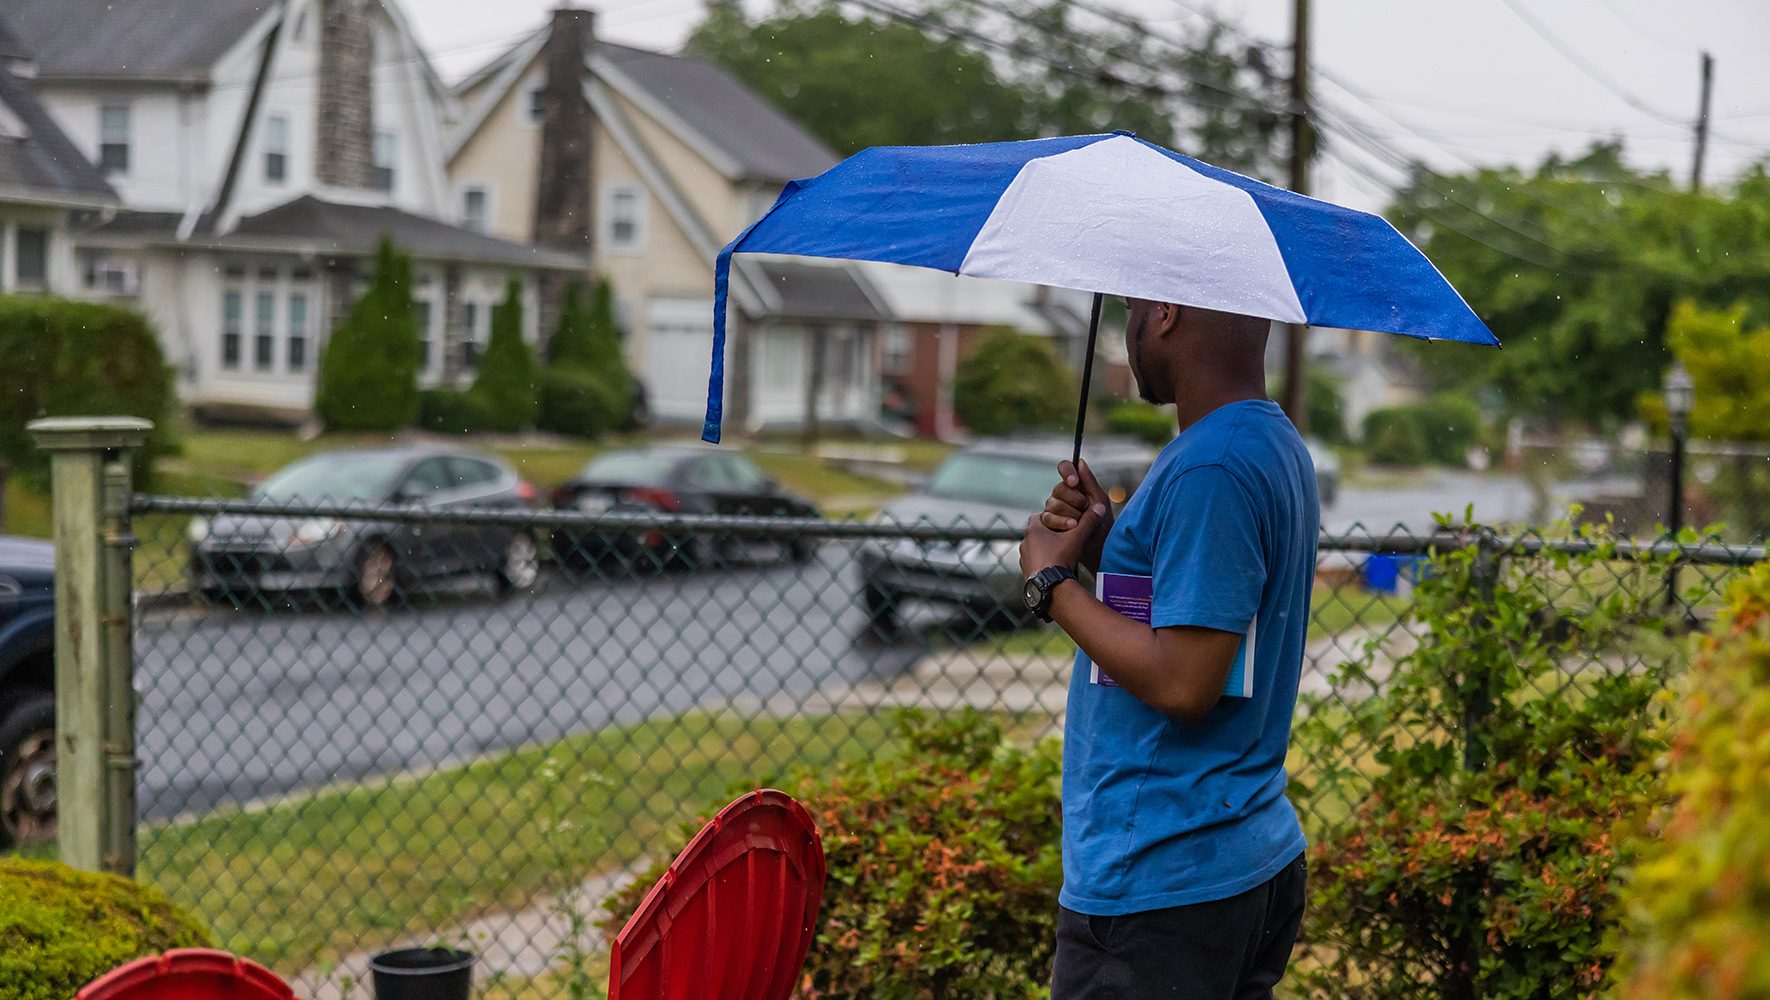 Robert, 36, a gay former refugee from Uganda, stands in his front yard near Philadelphia, Pennsylvania, during a lull in the rain on June 12, 2023. Robert was resettled by HIAS resettlement partner HIAS Pennsylvania in 2016. | 